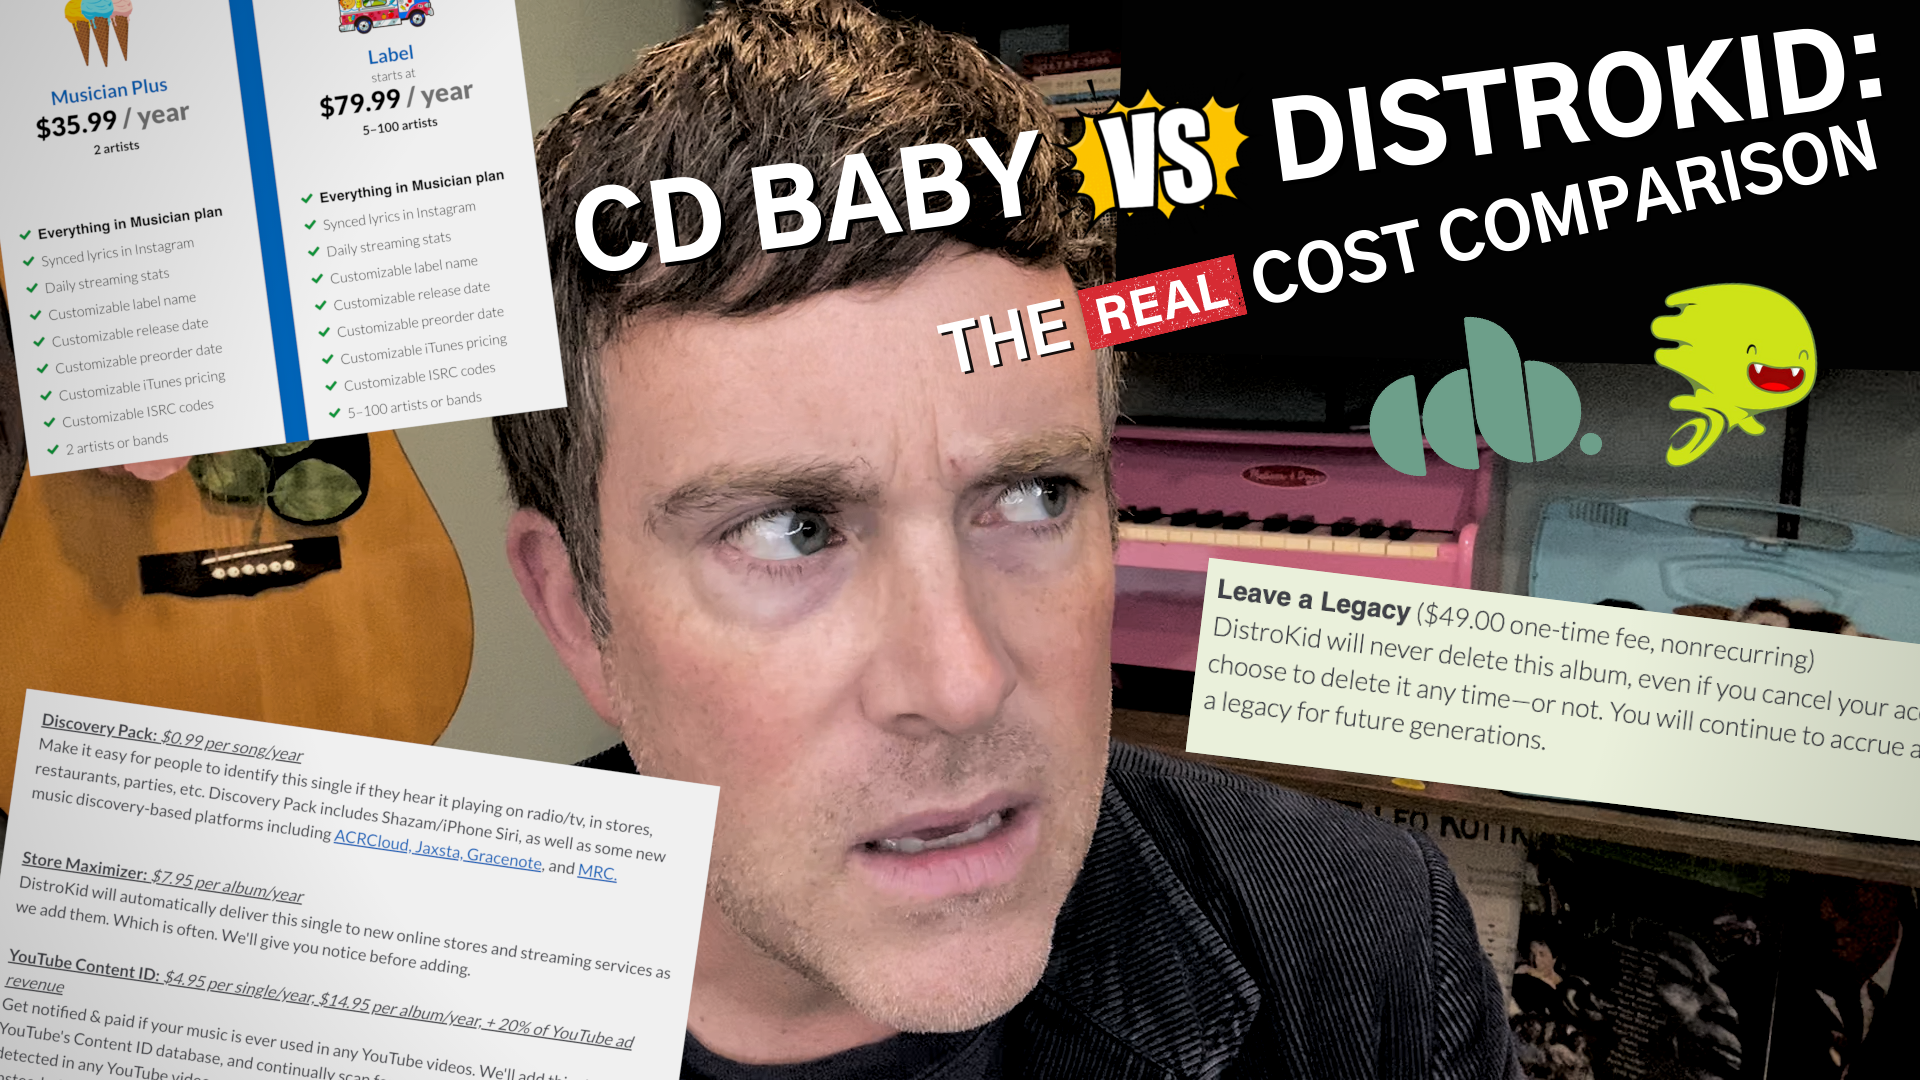 The true cost of DistroKid music distribution